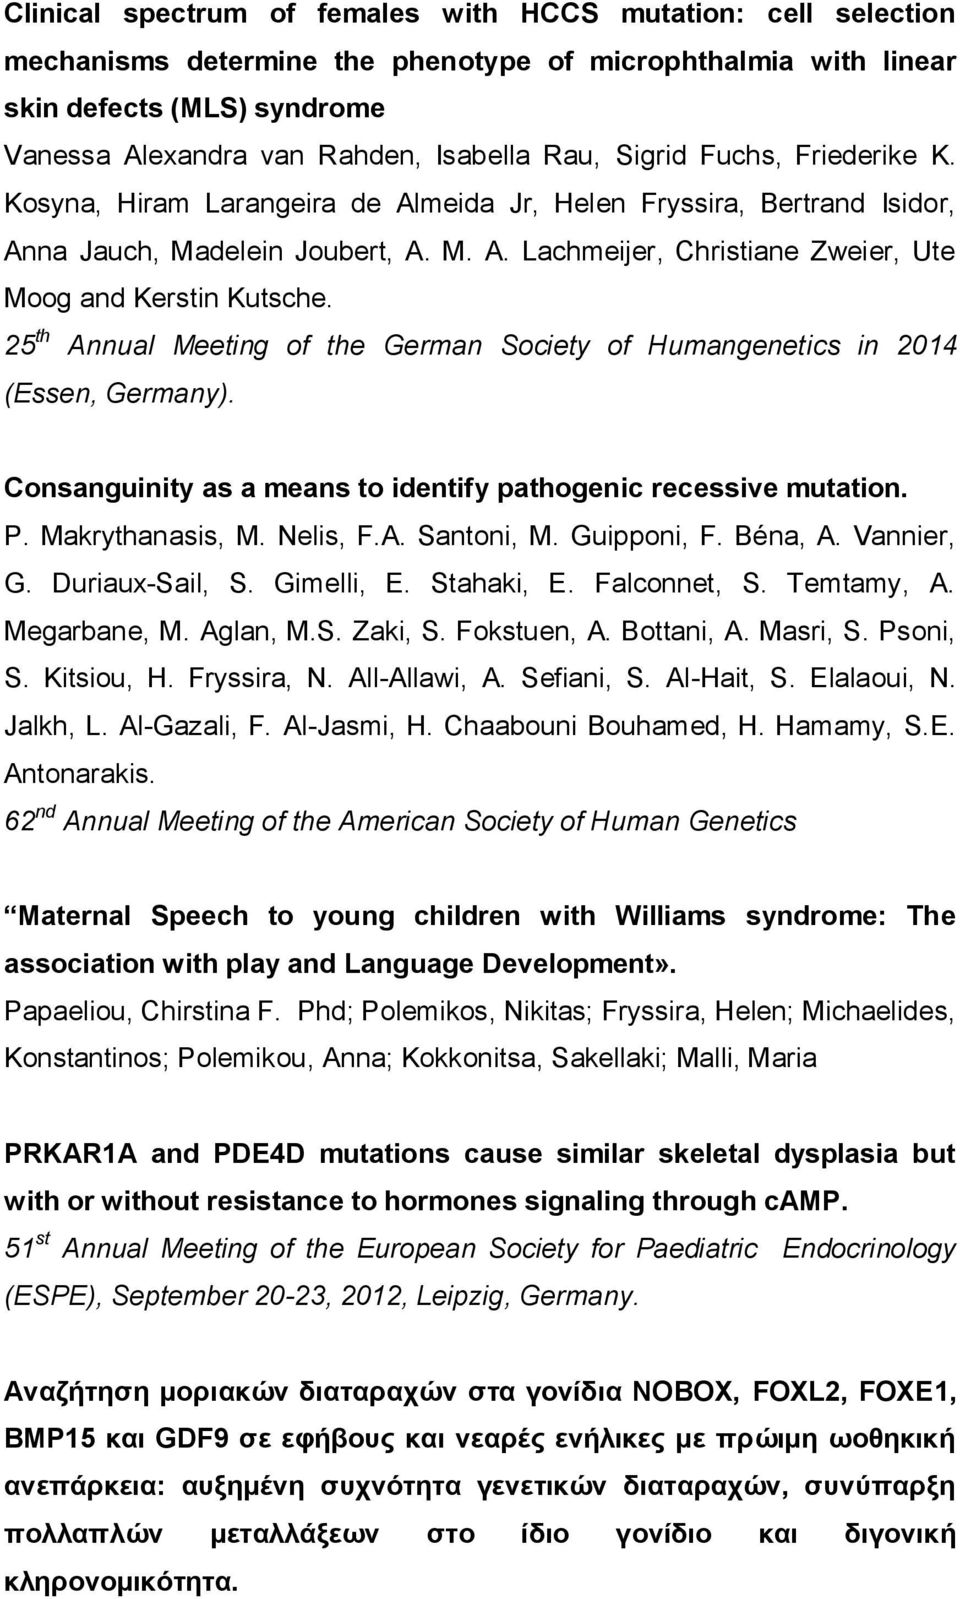 25 th Annual Meeting of the German Society of Humangenetics in 2014 (Essen, Germany). Consanguinity as a means to identify pathogenic recessive mutation. P. Makrythanasis, M. Nelis, F.A. Santoni, M.